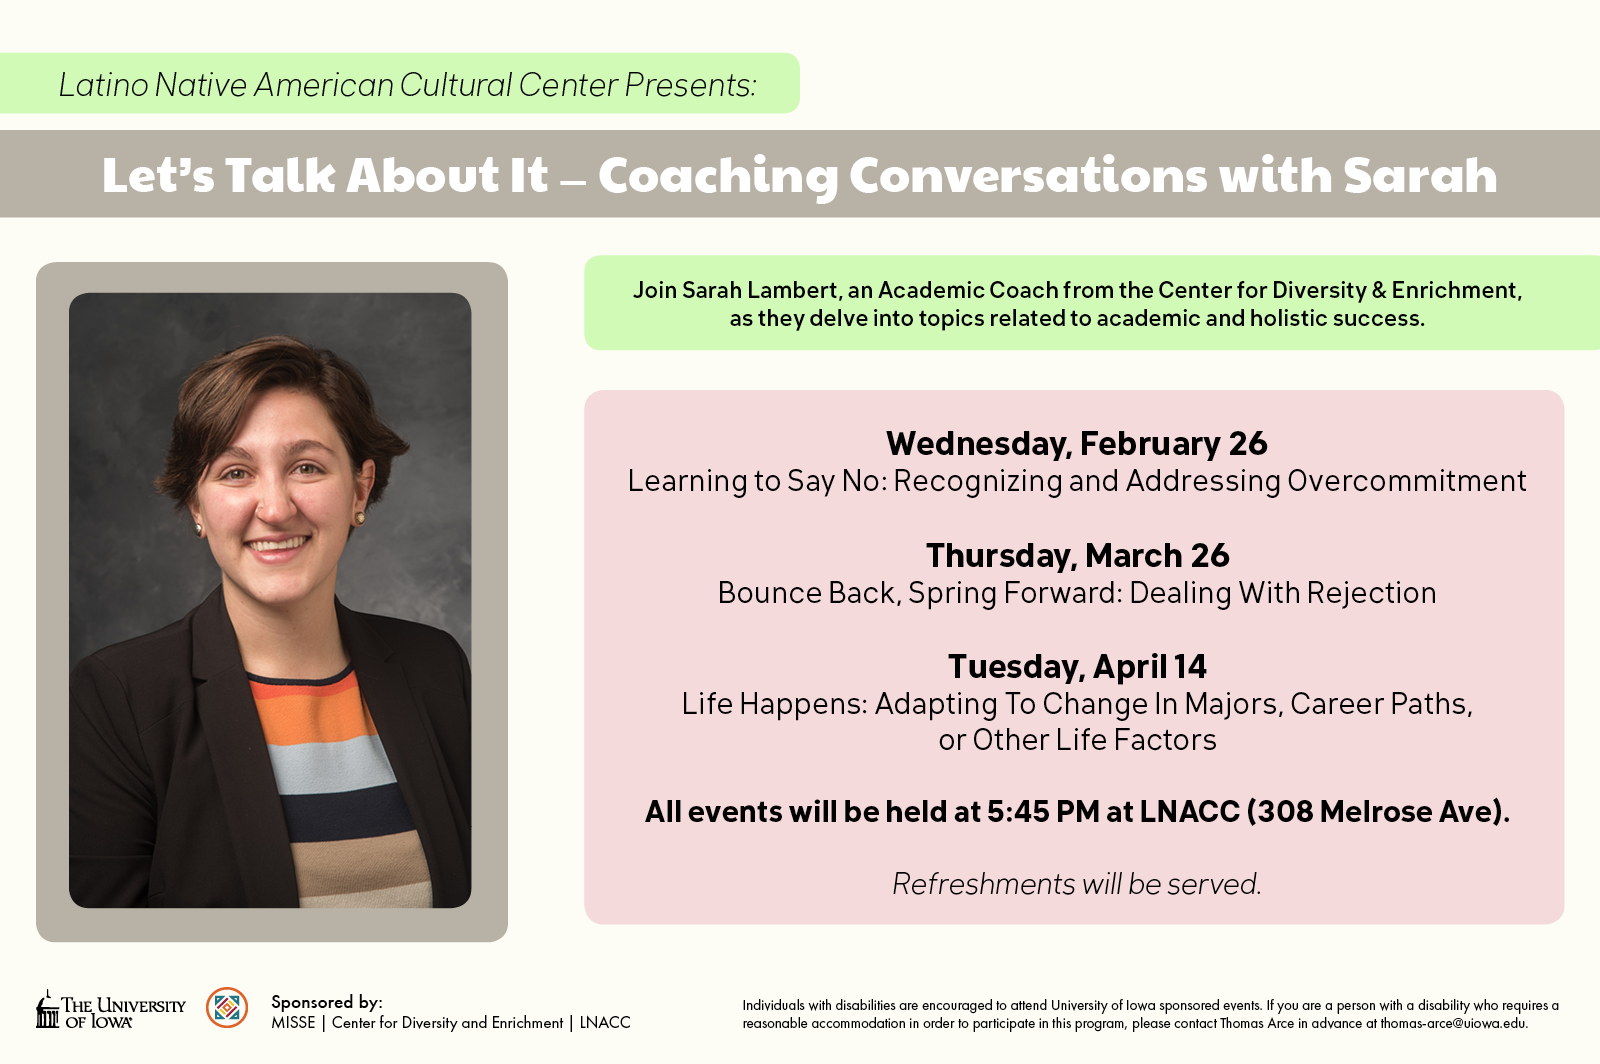 Latino Native American Cultural Center Presents: Let's Talk About It - Coaching Conversations with Sarah. Join Sarah Lambert, an academic coach from the Center for Diversity & Enrichment, as they delve into topics related to academic and holistic success.